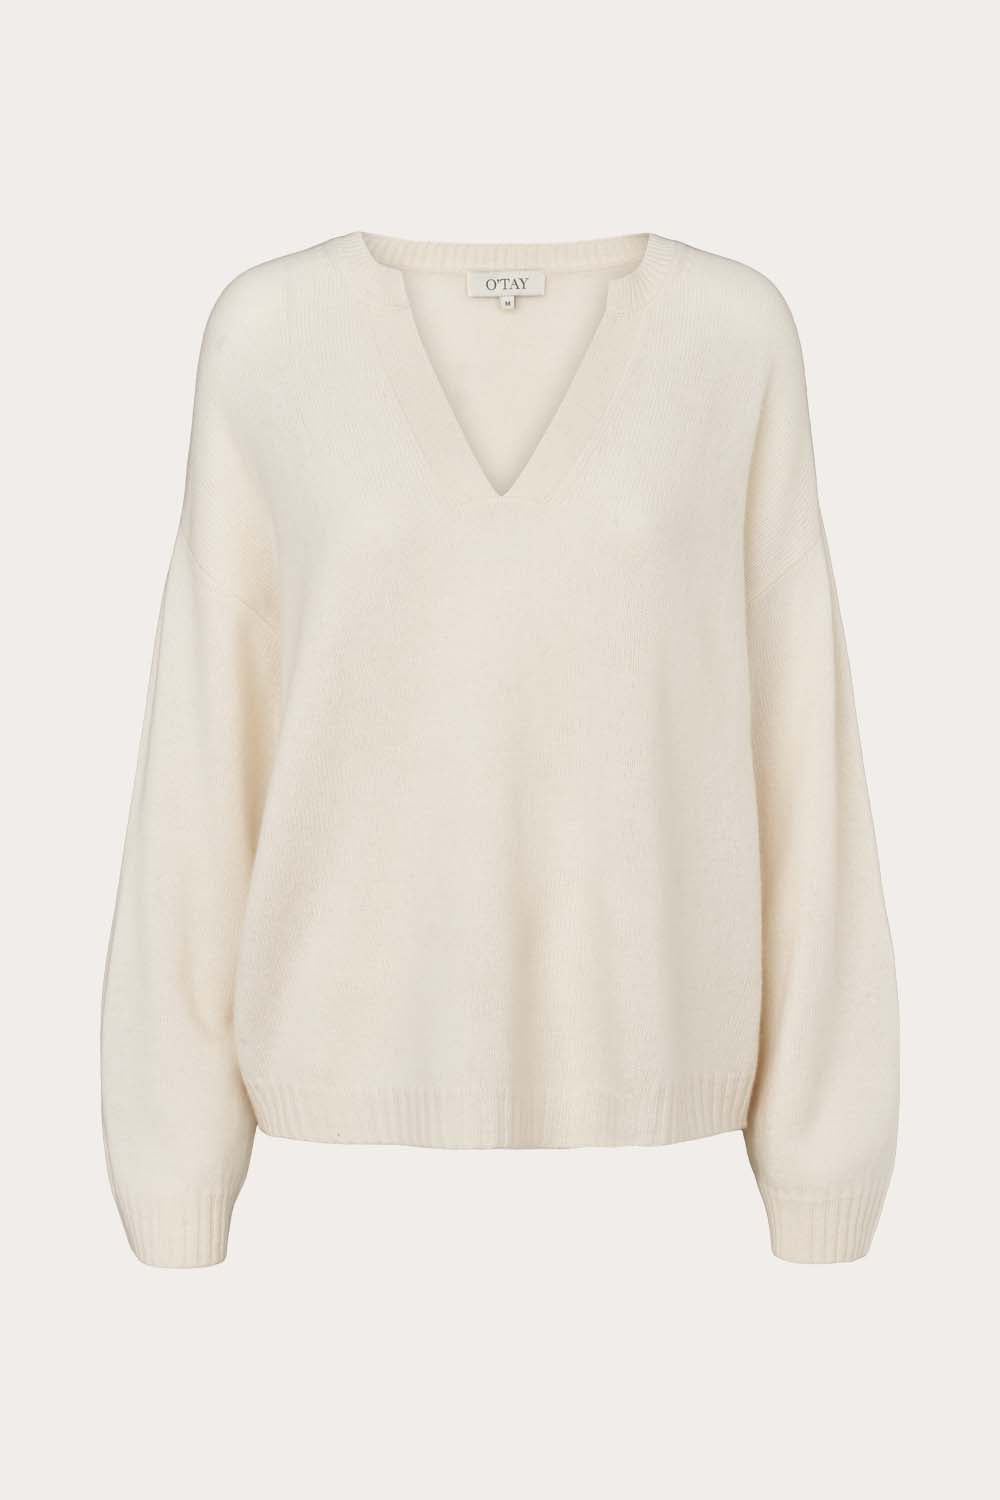 O'TAY Donna Sweater Blouses Off White